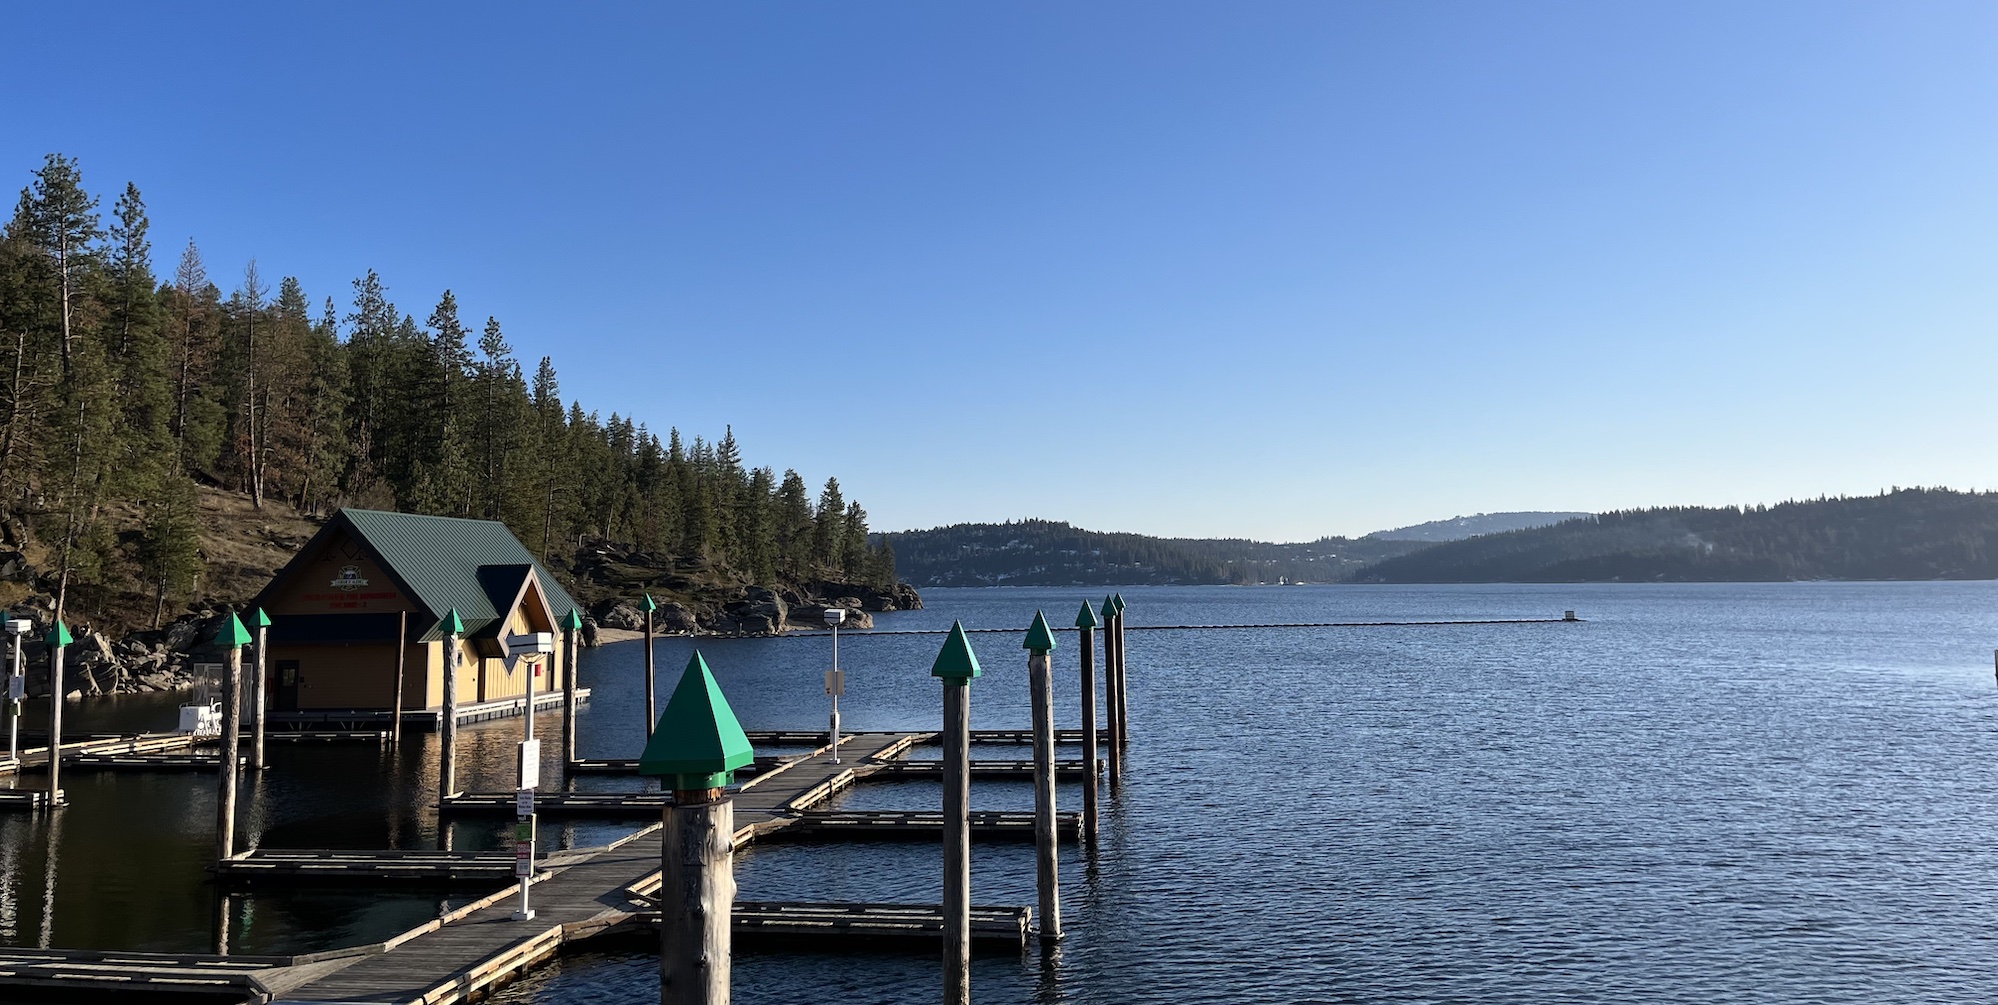 View of Lake Coeur D'Alene from the dock in McEuen Park